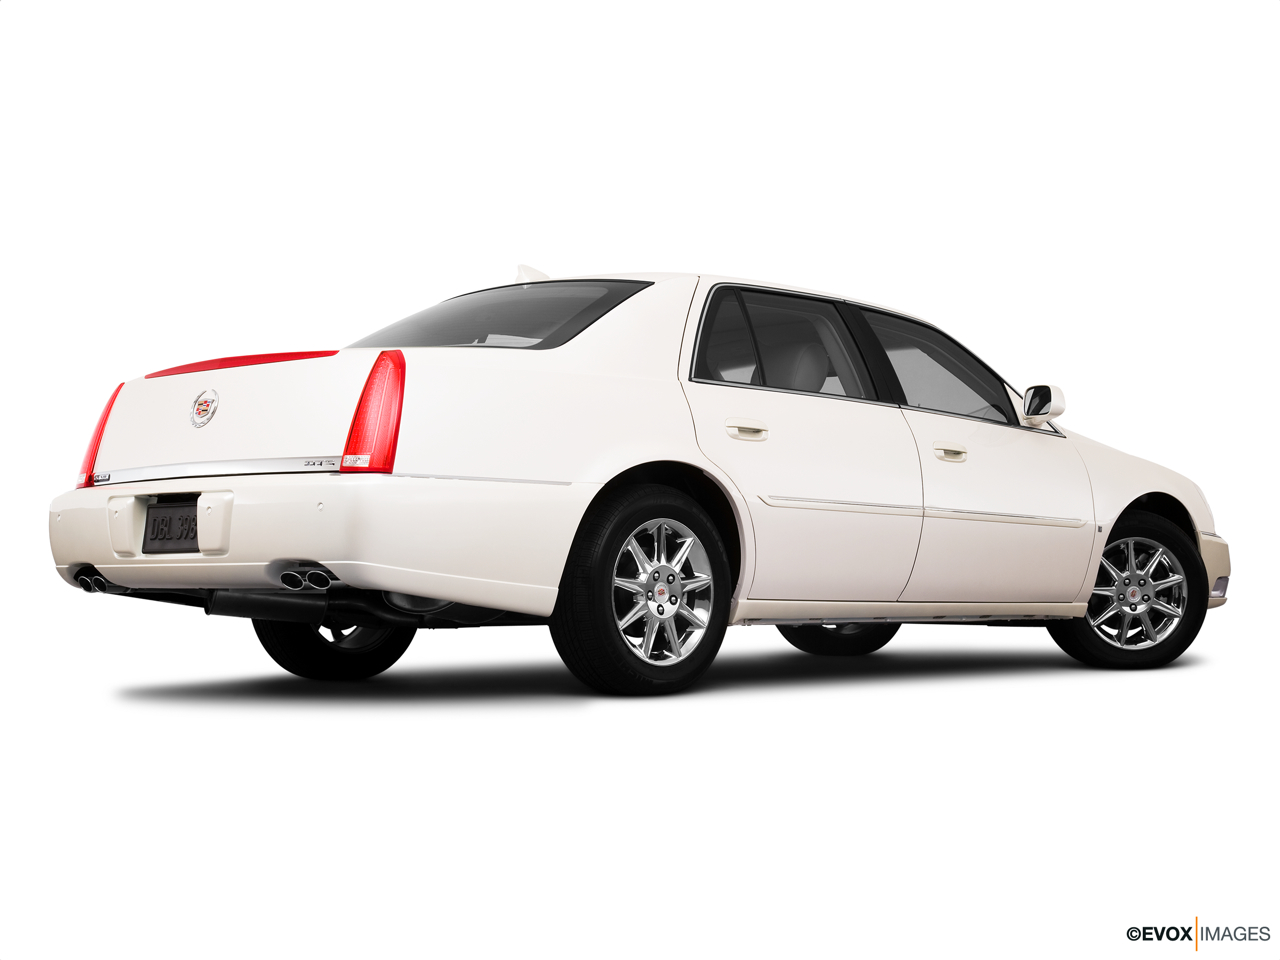 2010 Cadillac DTS Luxury Collection Low/wide rear 5/8. 